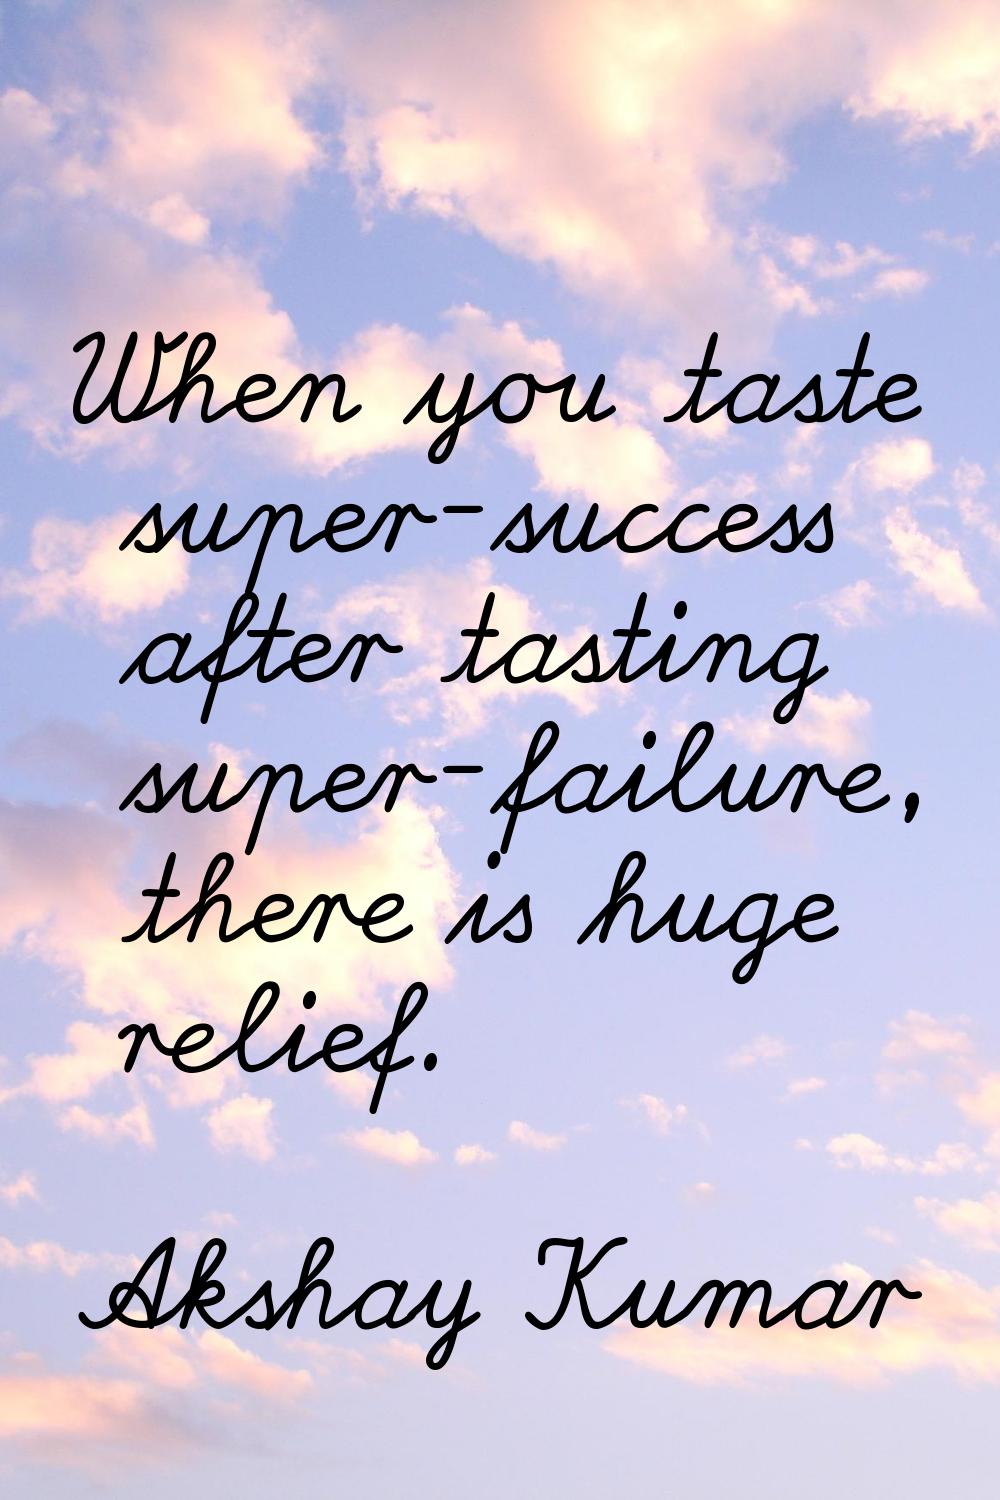 When you taste super-success after tasting super-failure, there is huge relief.